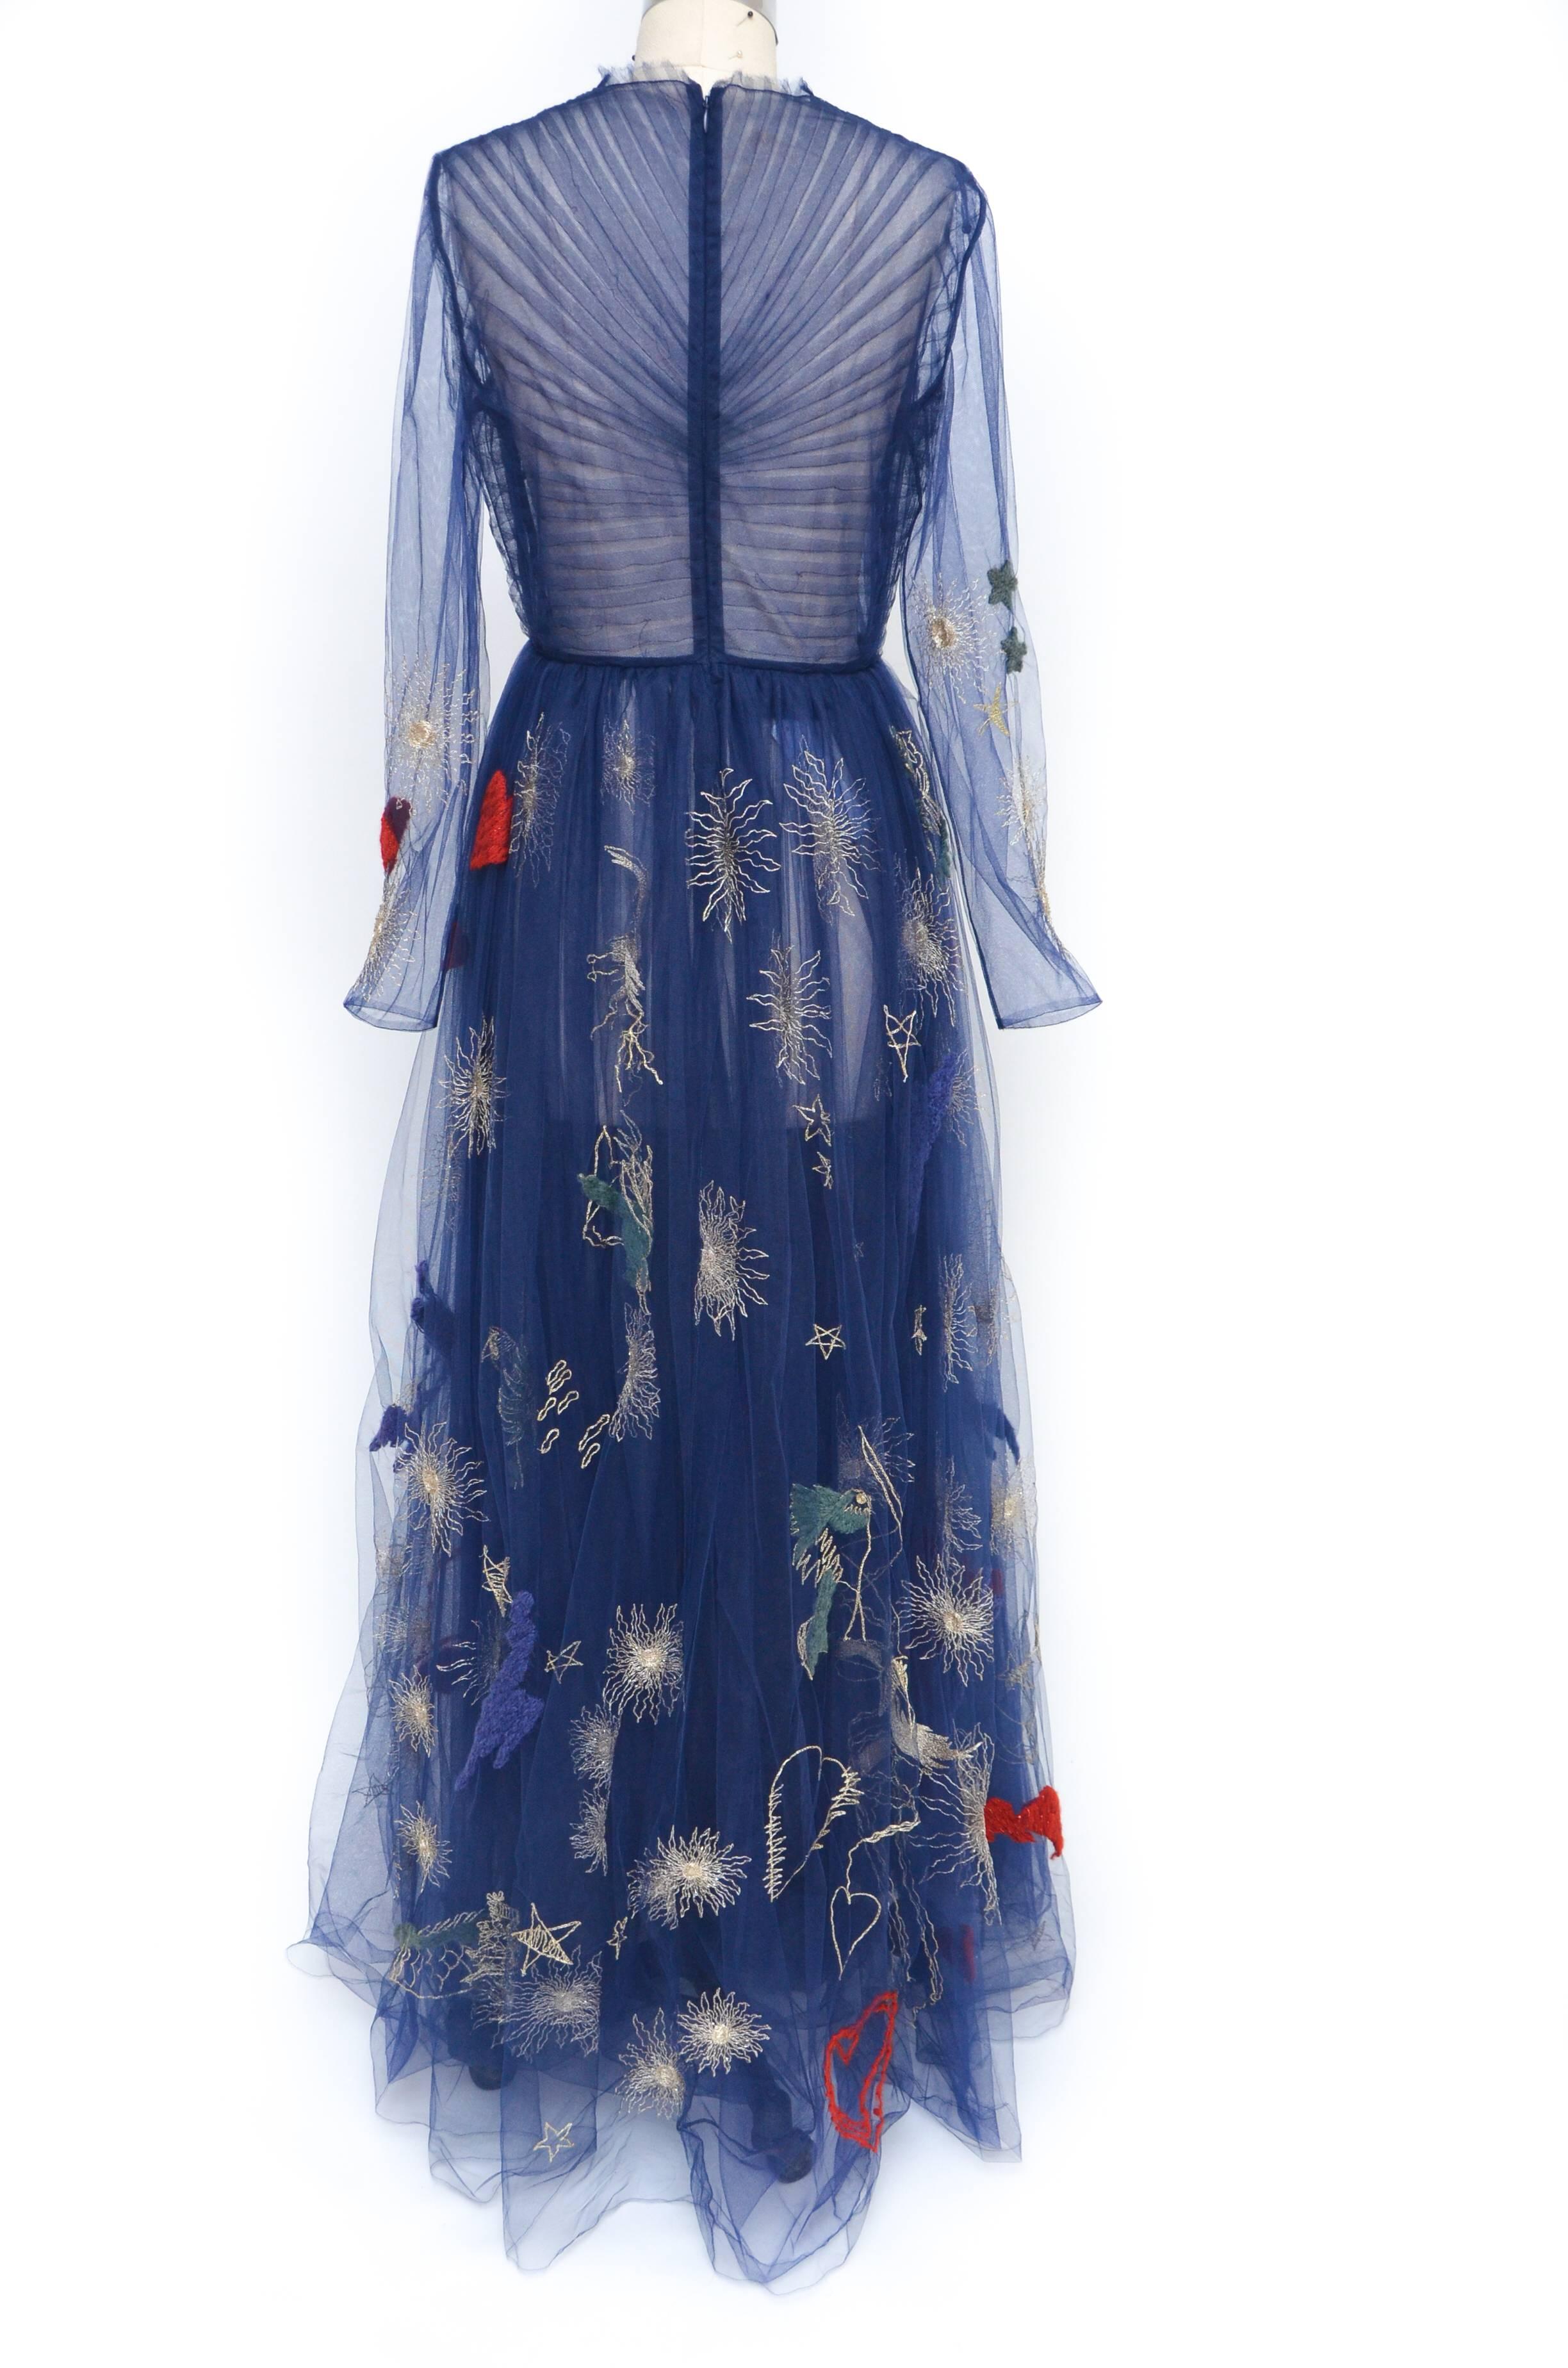 One of the most  coveted and most wanted  dress ever...
The embroidered tulle gown by Valentino is created of magical midnight navy tulle and with no further introductions, it is a vision.
The sheer bodice is gathered into a romantic red heart on